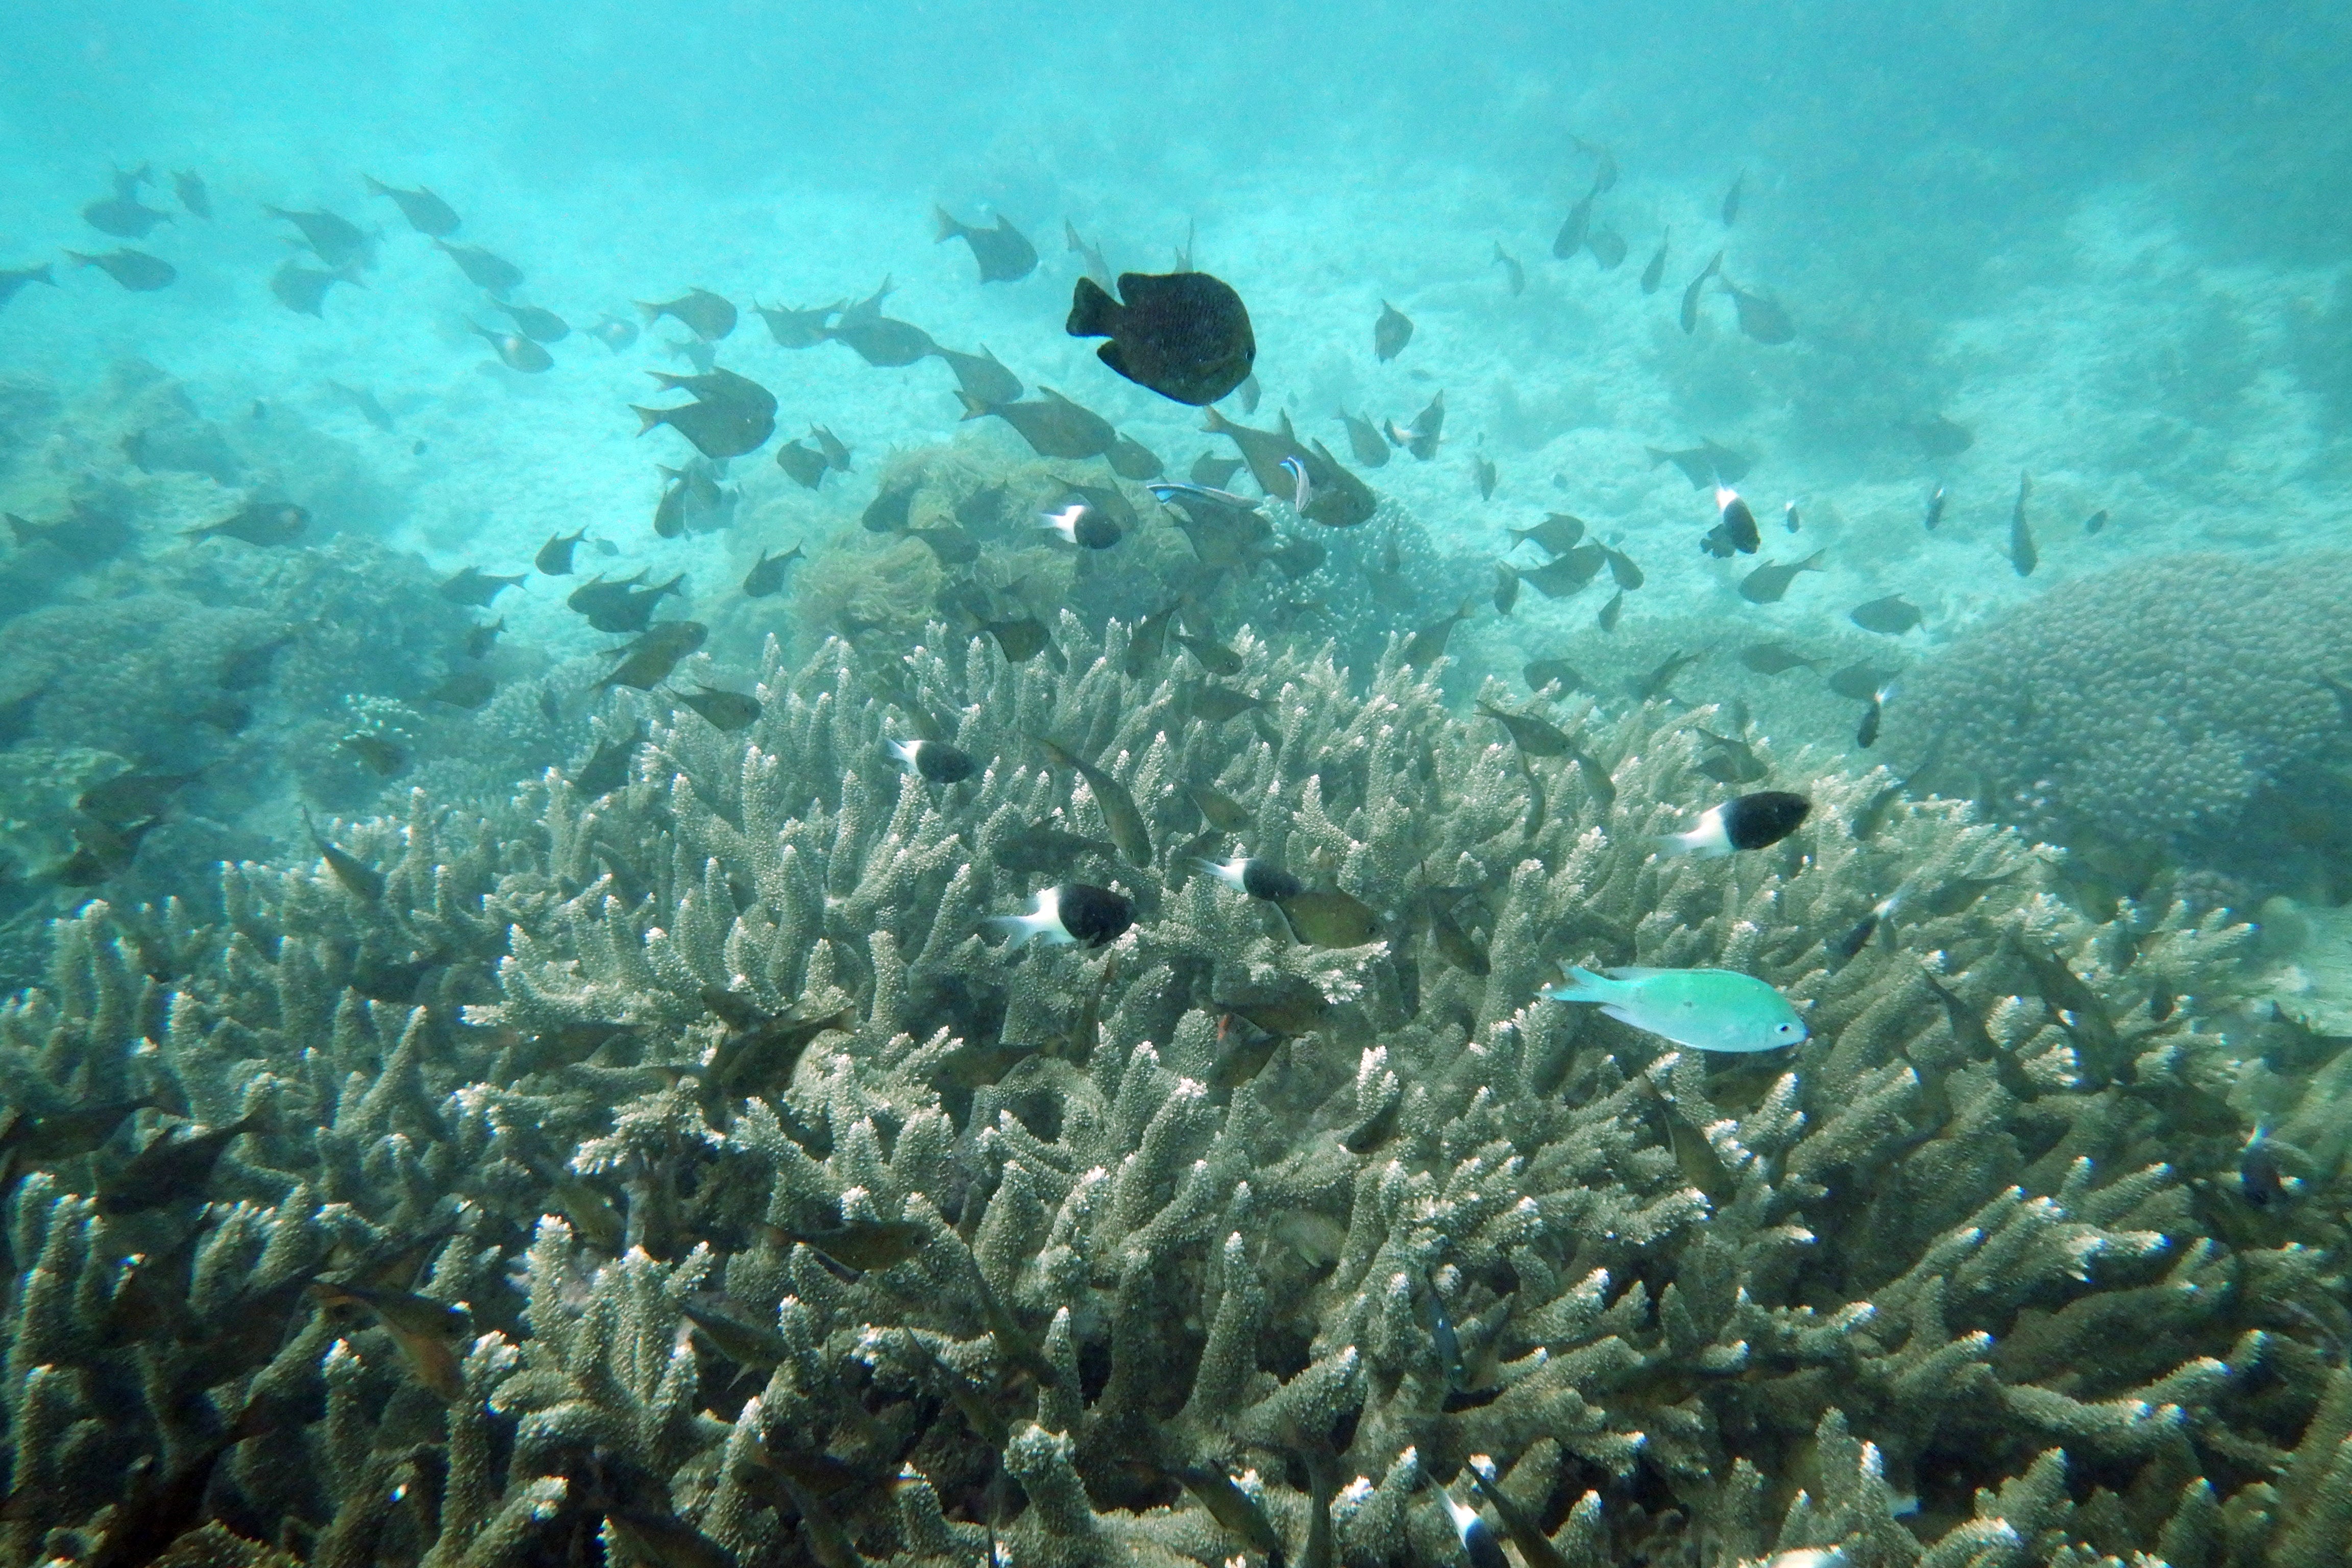 Rising ocean temperatures result in ‘coral bleaching,’ where the death of ocean algae means coral loses its colouring